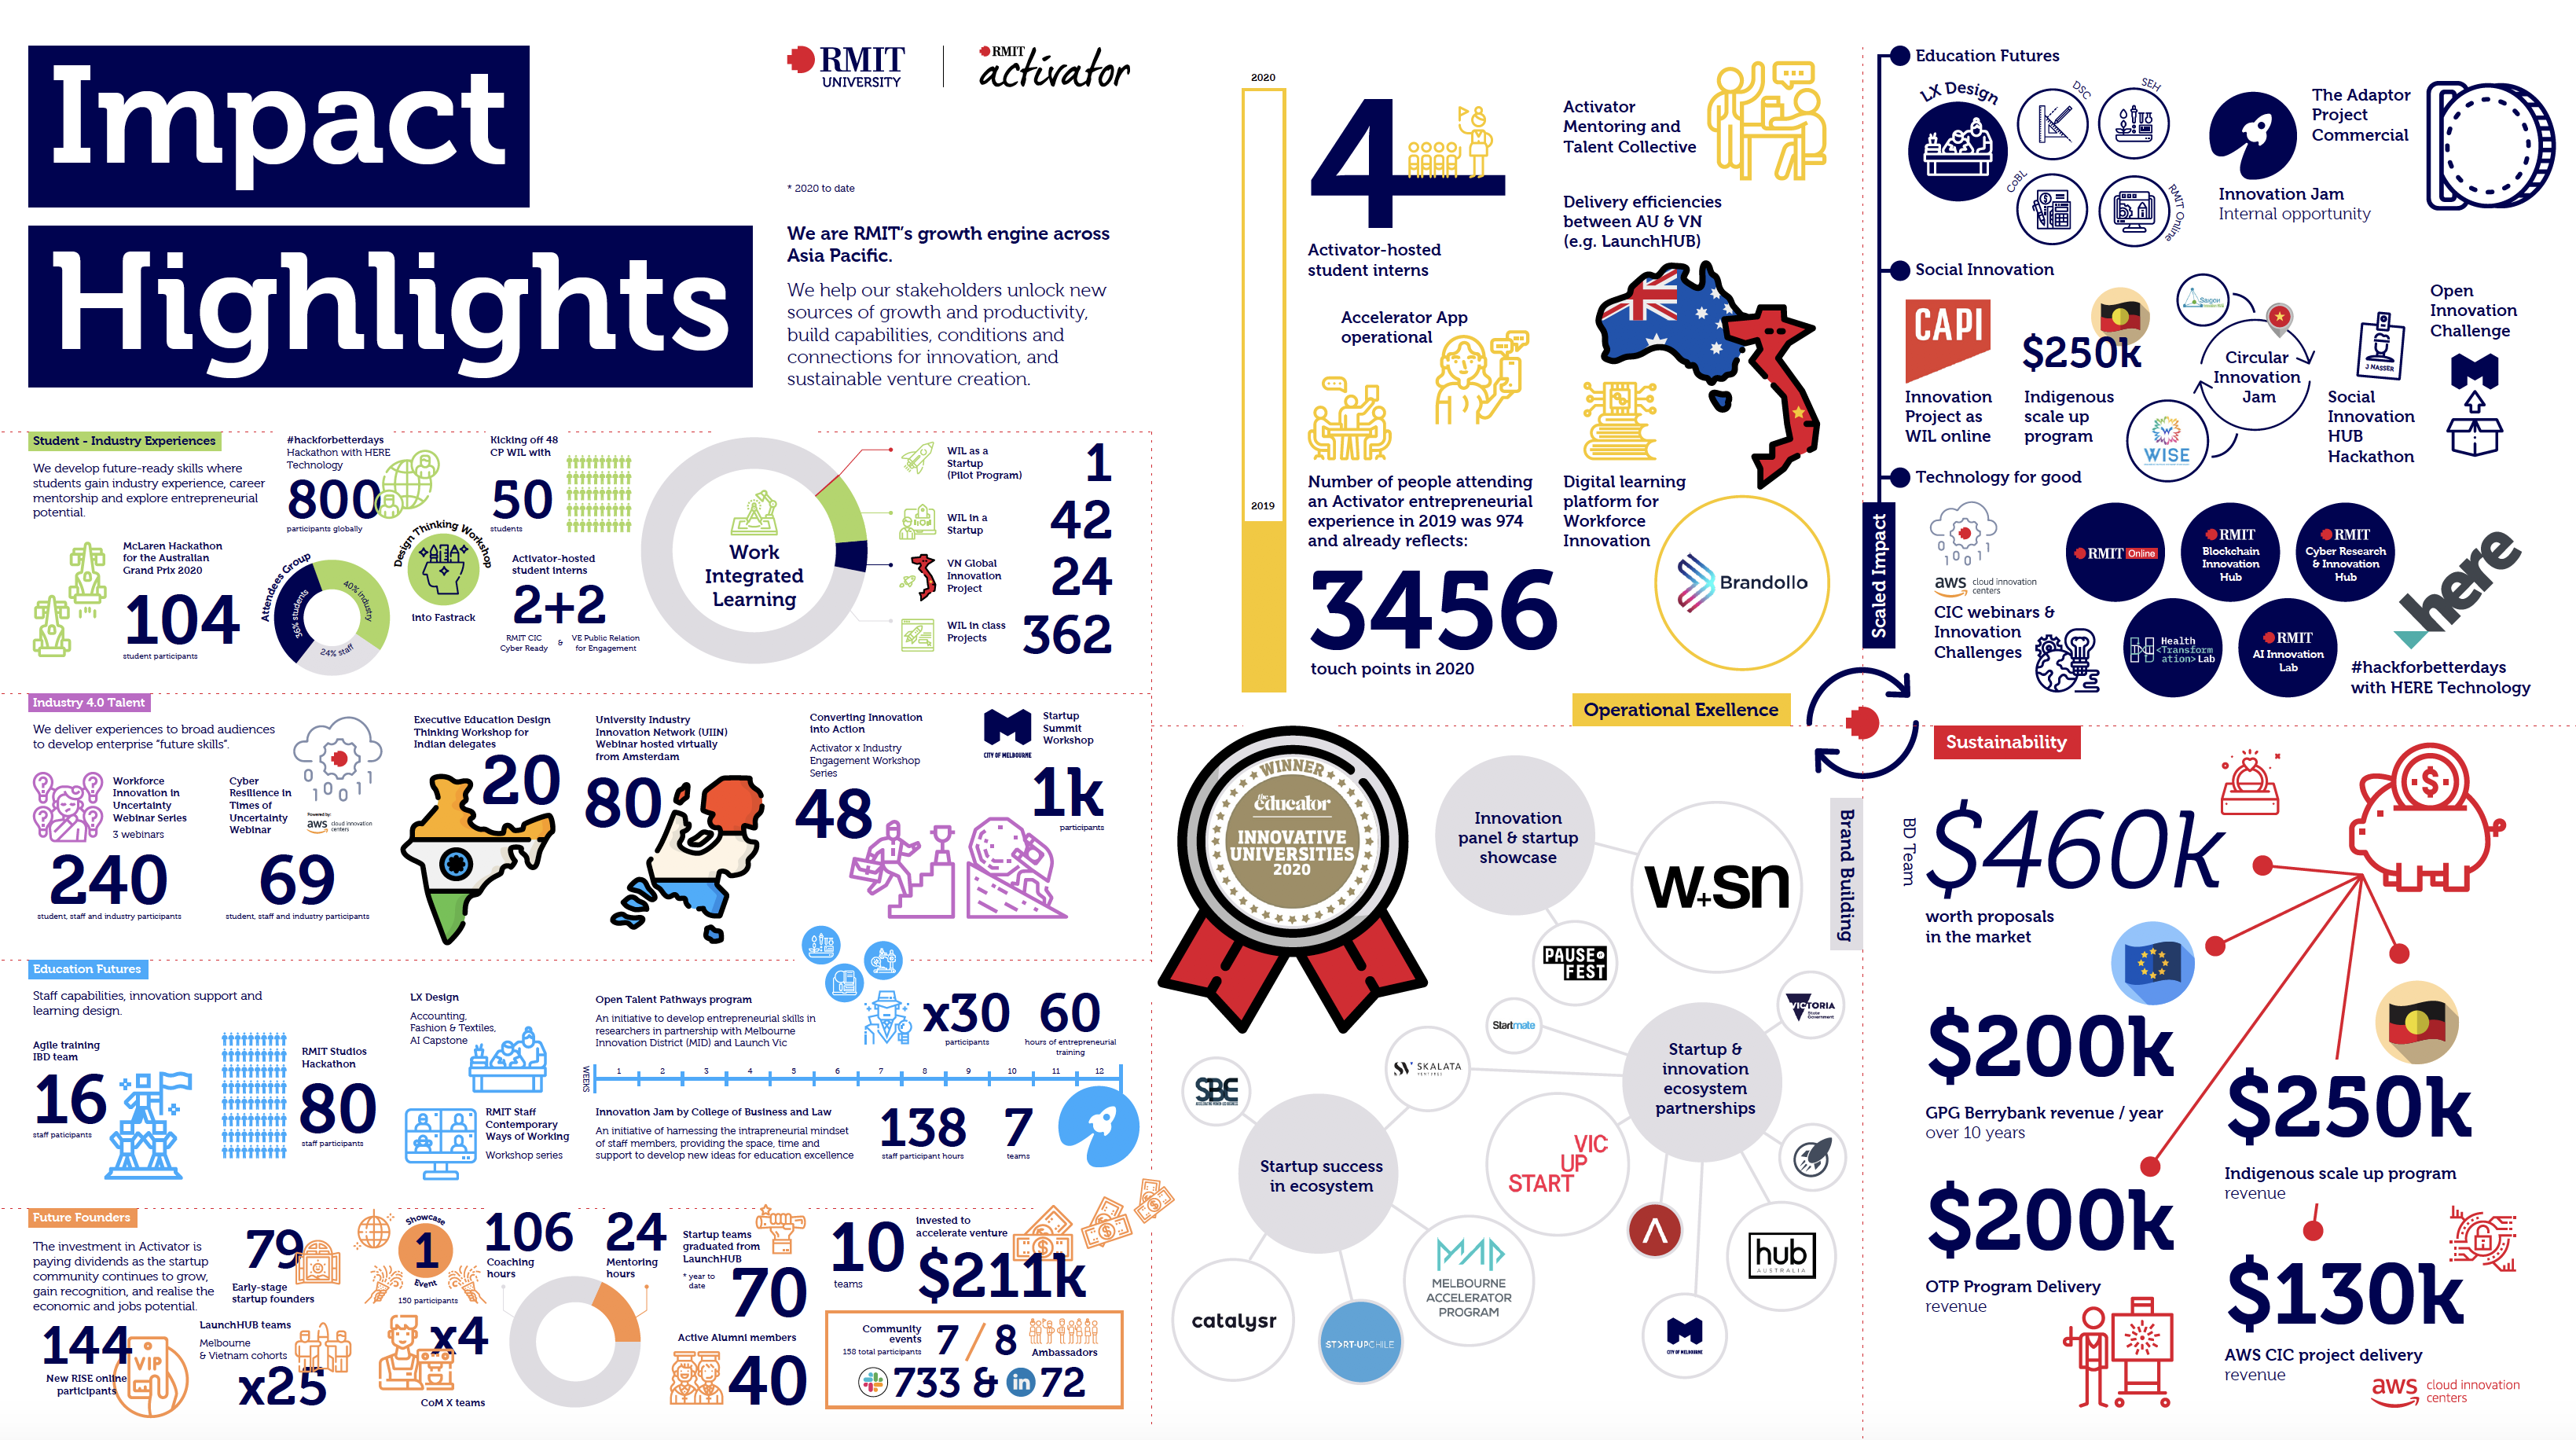 Image of Activator Impact Highlights 2020 infographic